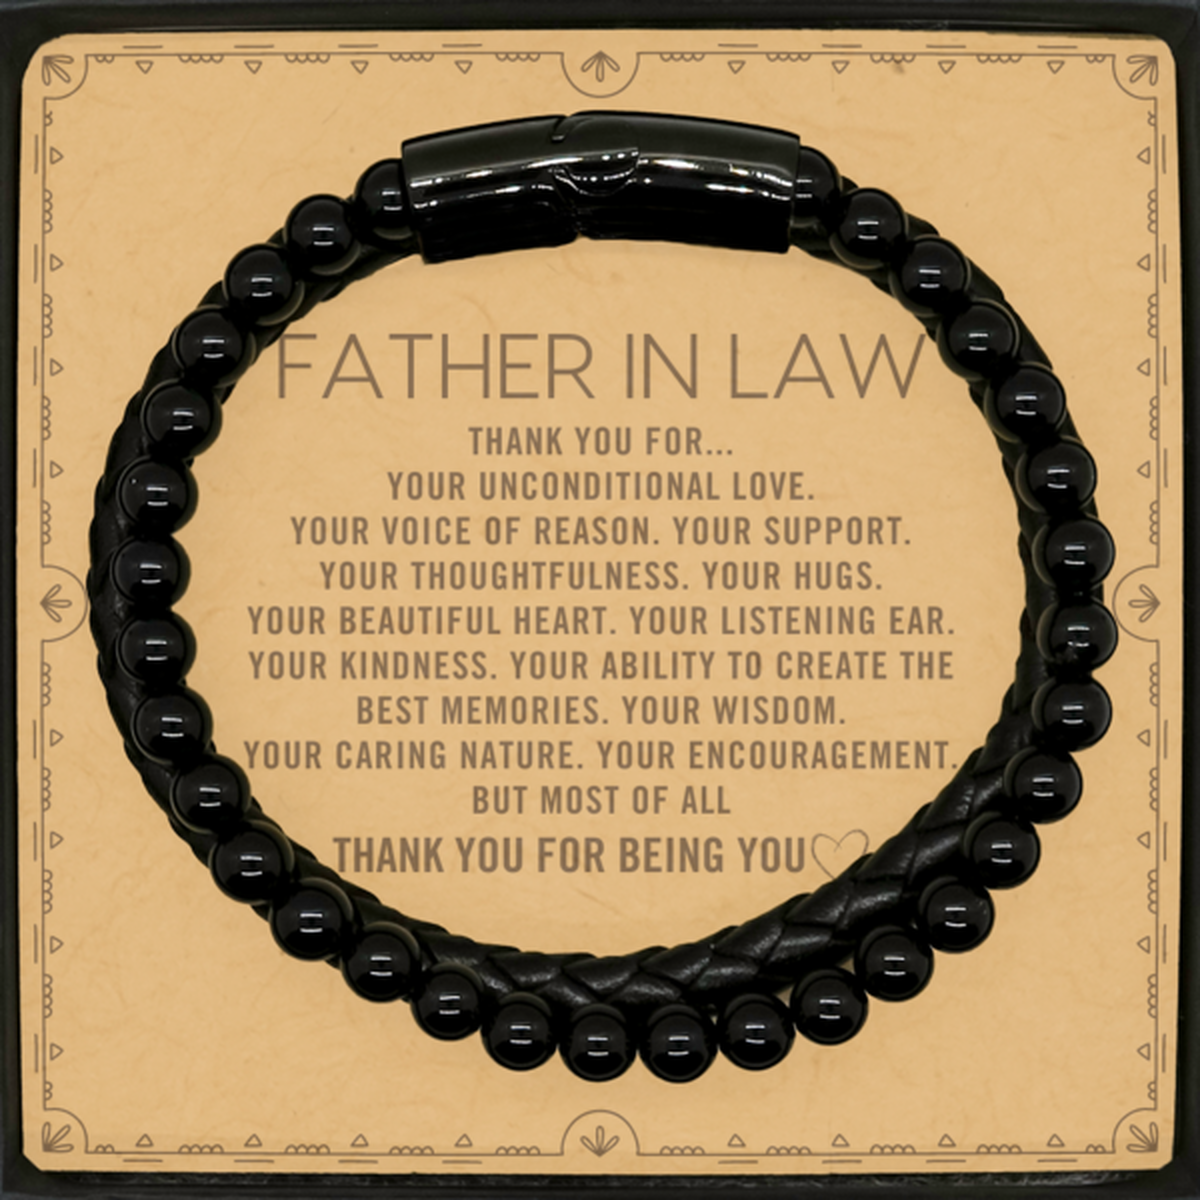 Father In Law Stone Leather Bracelets Custom, Message Card Gifts For Father In Law Christmas Graduation Birthday Gifts for Men Women Father In Law Thank you for Your unconditional love